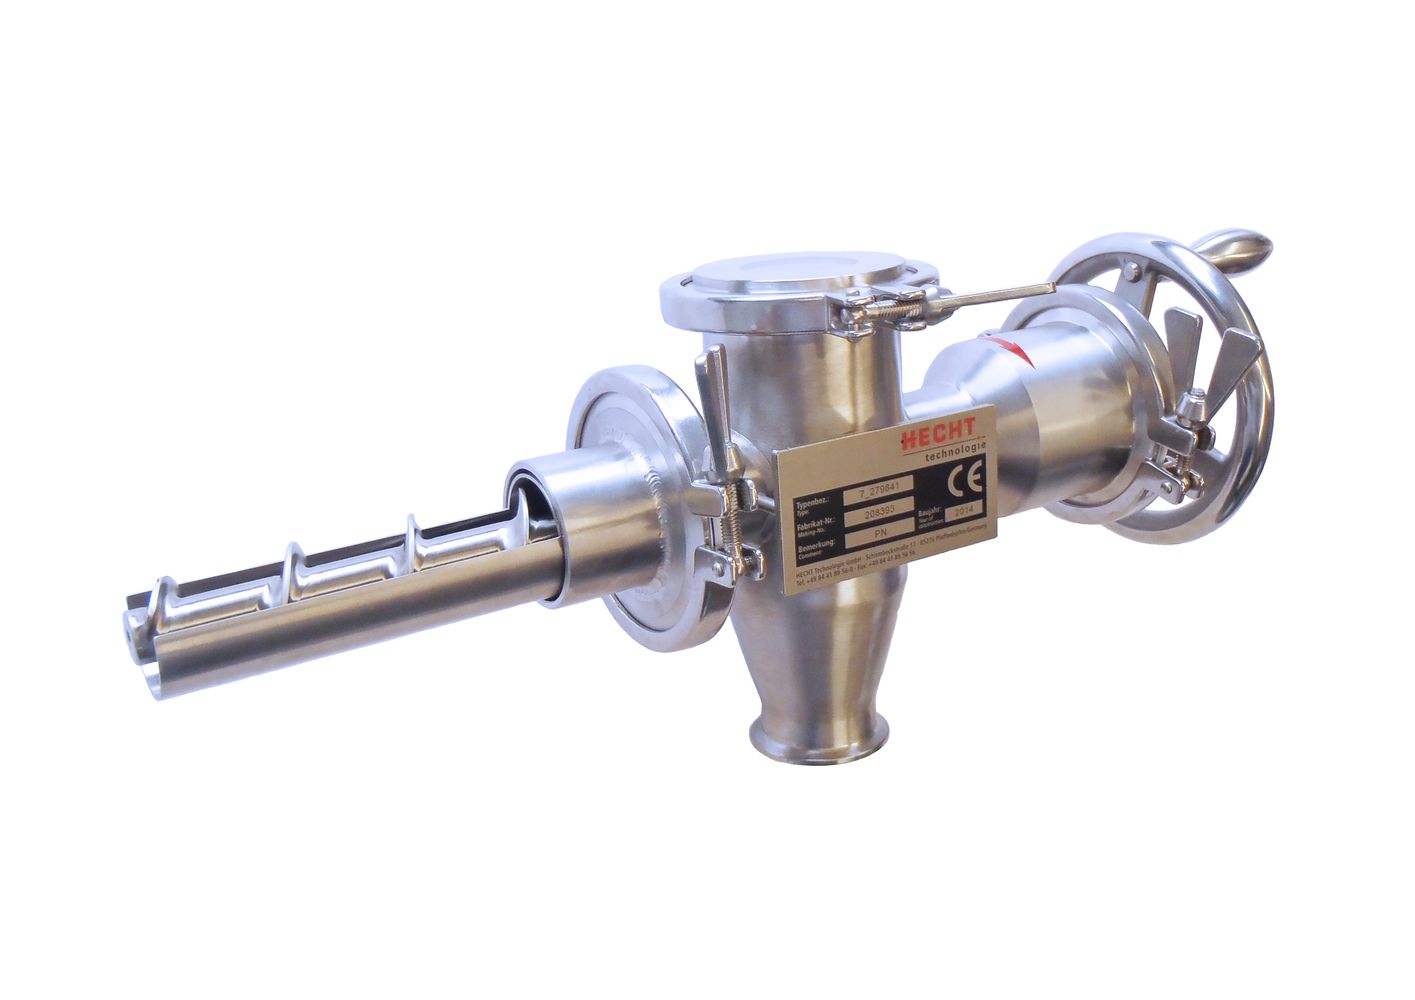 HECHT stainless steel screw sampler device for industrial use, featuring a robust body with an extendable sampling probe and a CE mark, designed for efficient and reliable collection of material samples from process streams.